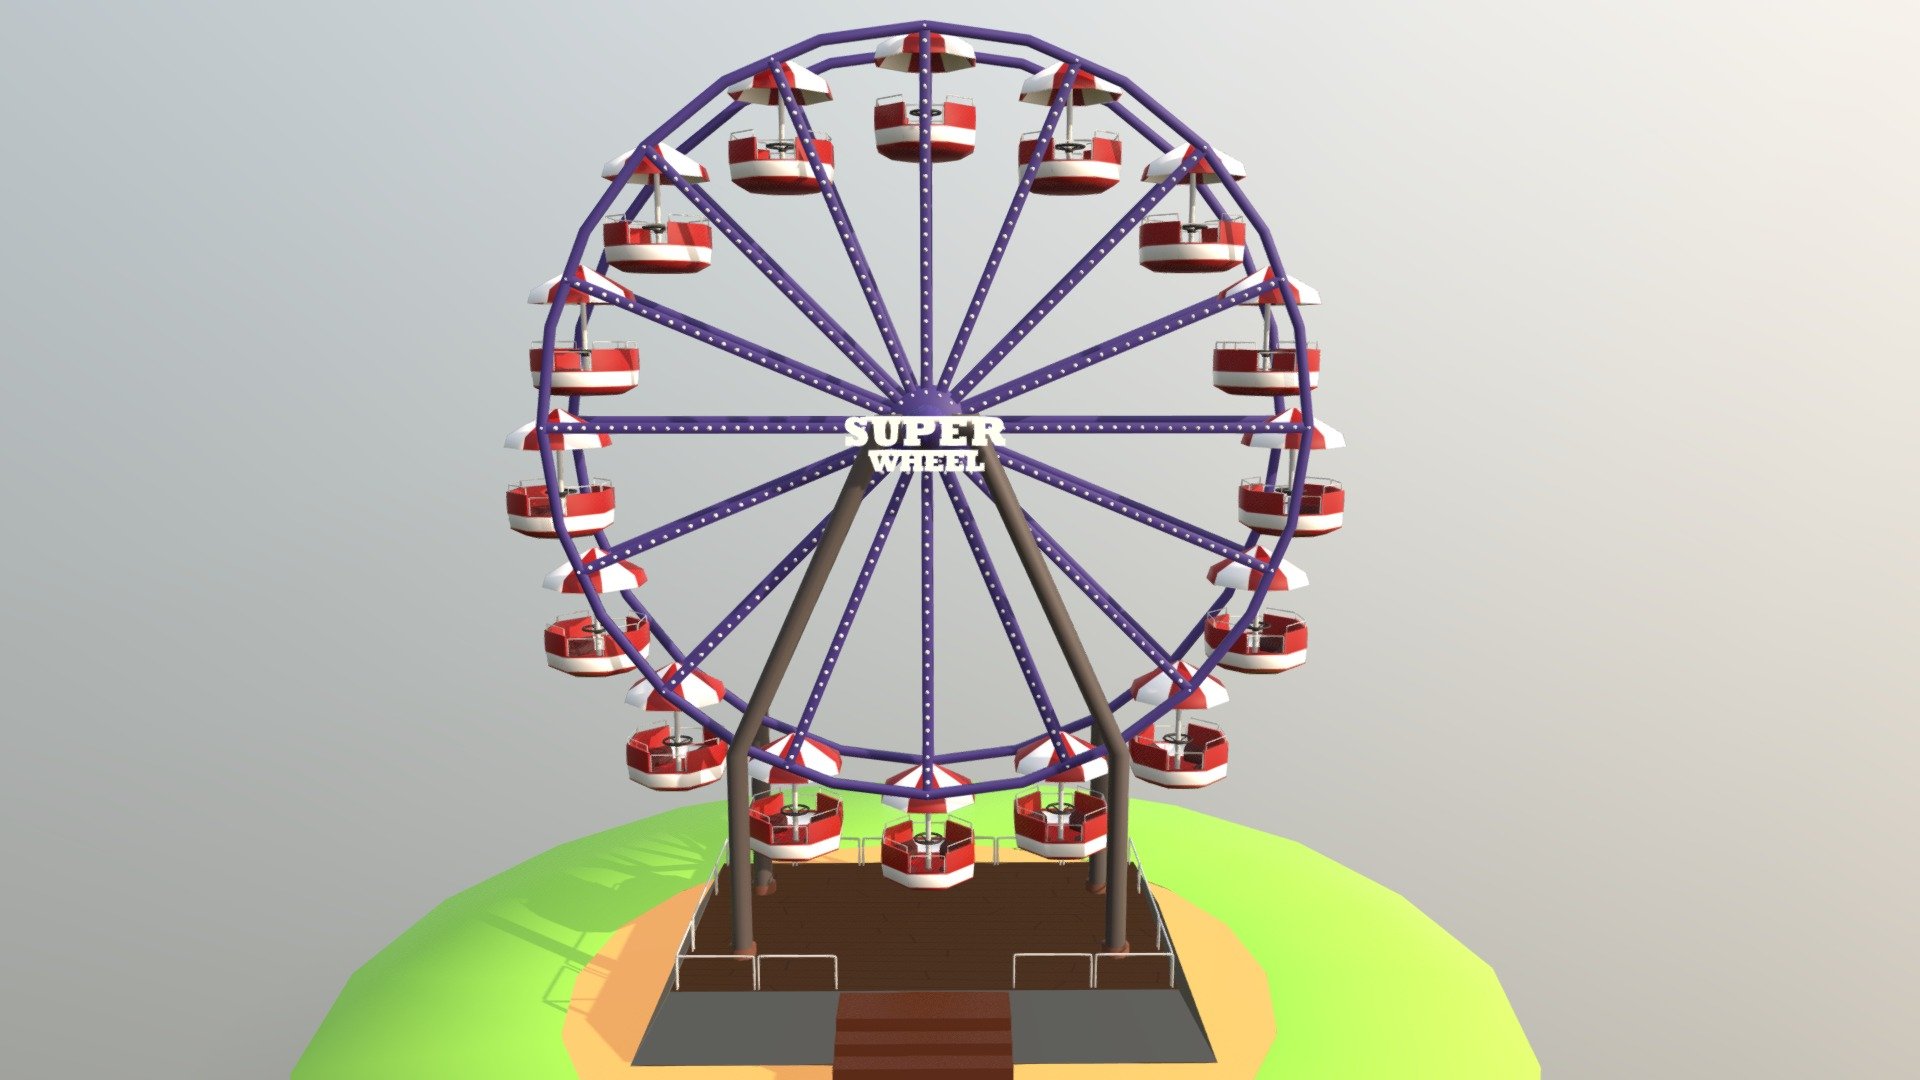 This Ferris wheel is medium/low quality 3D model. That will enhance detail to any of your rendering projects. . The model has a fully textured and detailed design that allows for close-up renders, and was originally modeled,texturized in Autodesk Maya 2018 and rendered with Arnold. The model have Uvs done and it contains all the textures.

This model can be used for any type of work as: low poly or high poly project, videogame, render, video, animation, film…This is perfect to use like a part of a amusement park scene or for a postcard image with other decoration such as the carousel that you could see in my profile too…

This contains a .fbx with all the textures.

I hope you like it, if you have any doubt or any question about it contact me without any problem! I will help you as soon as possible, if you like it I will aprecciate if you could give your personal review! Thanks - Ferris Wheel - Buy Royalty Free 3D model by Ainaritxu14 3d model